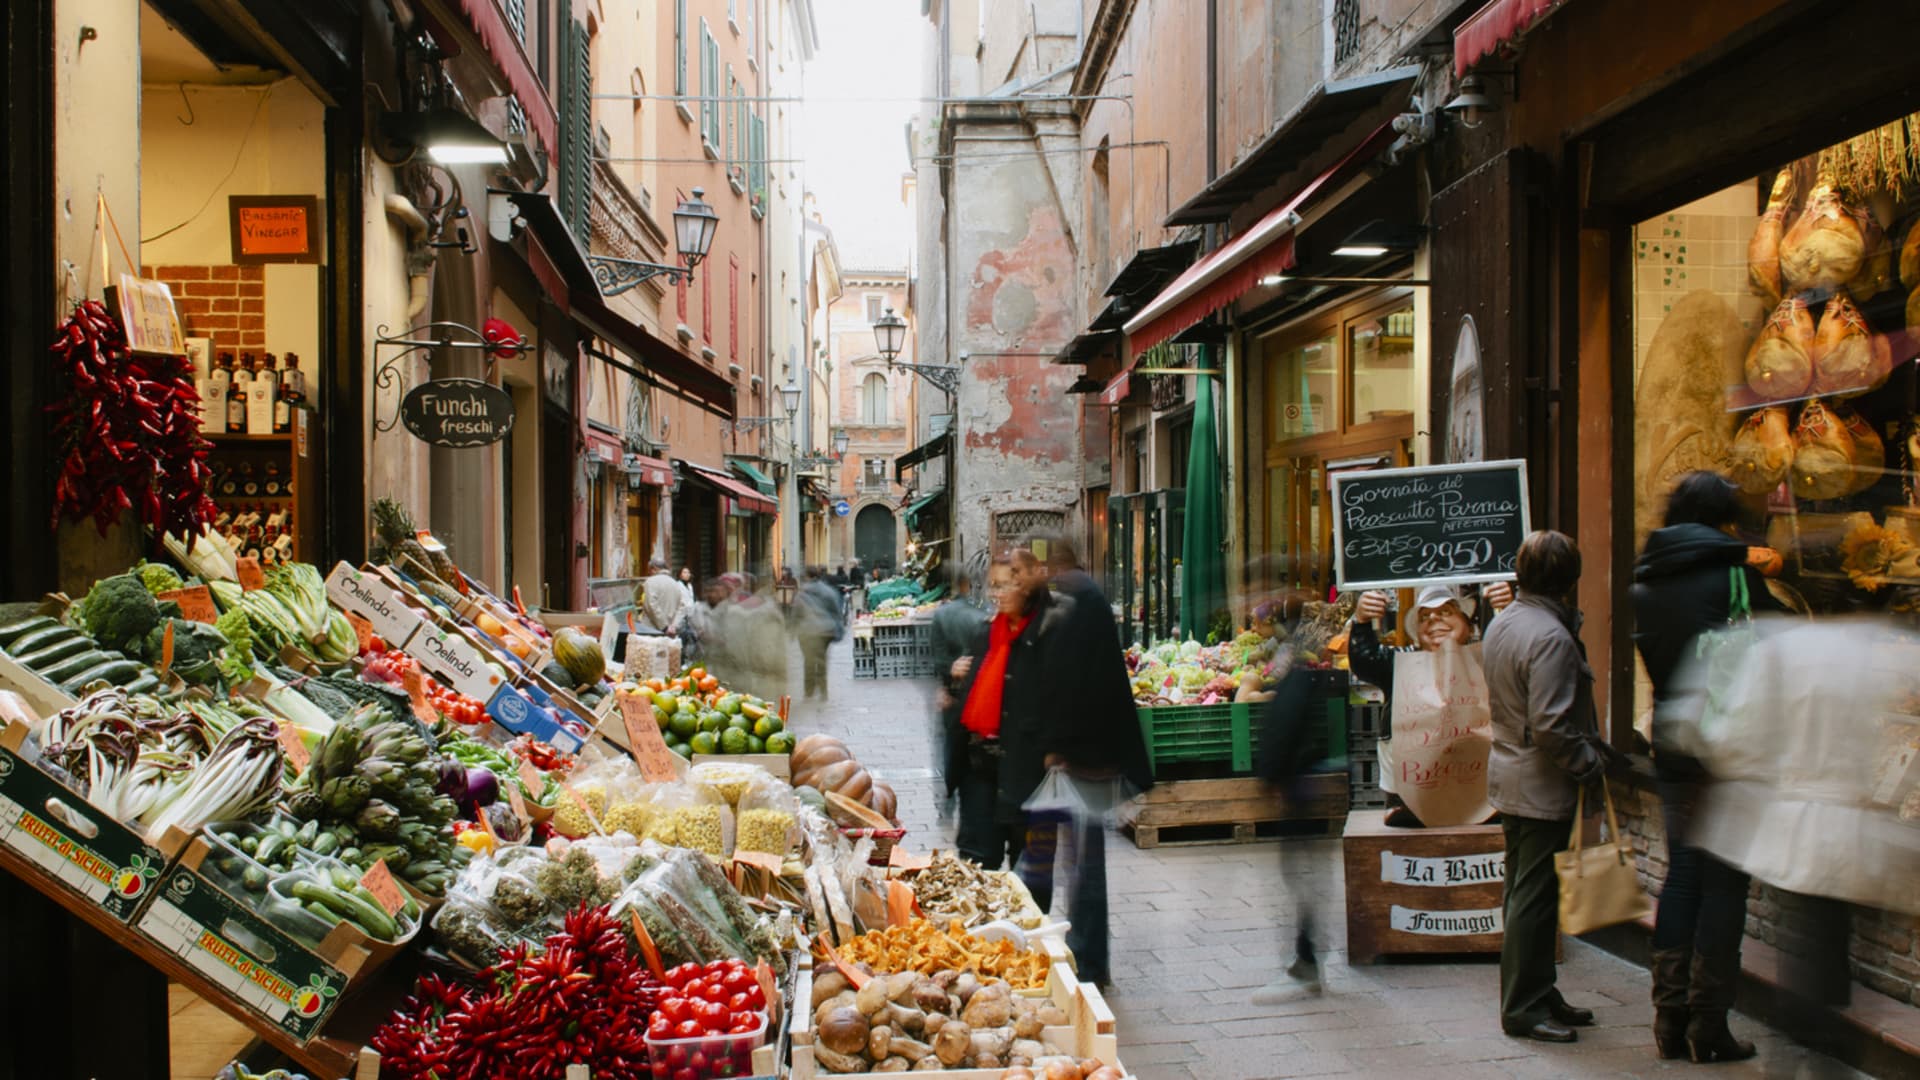 Bologna's food markets often tumble into the streets. Produce, cheese and wine from local farmers can be bought around the city.